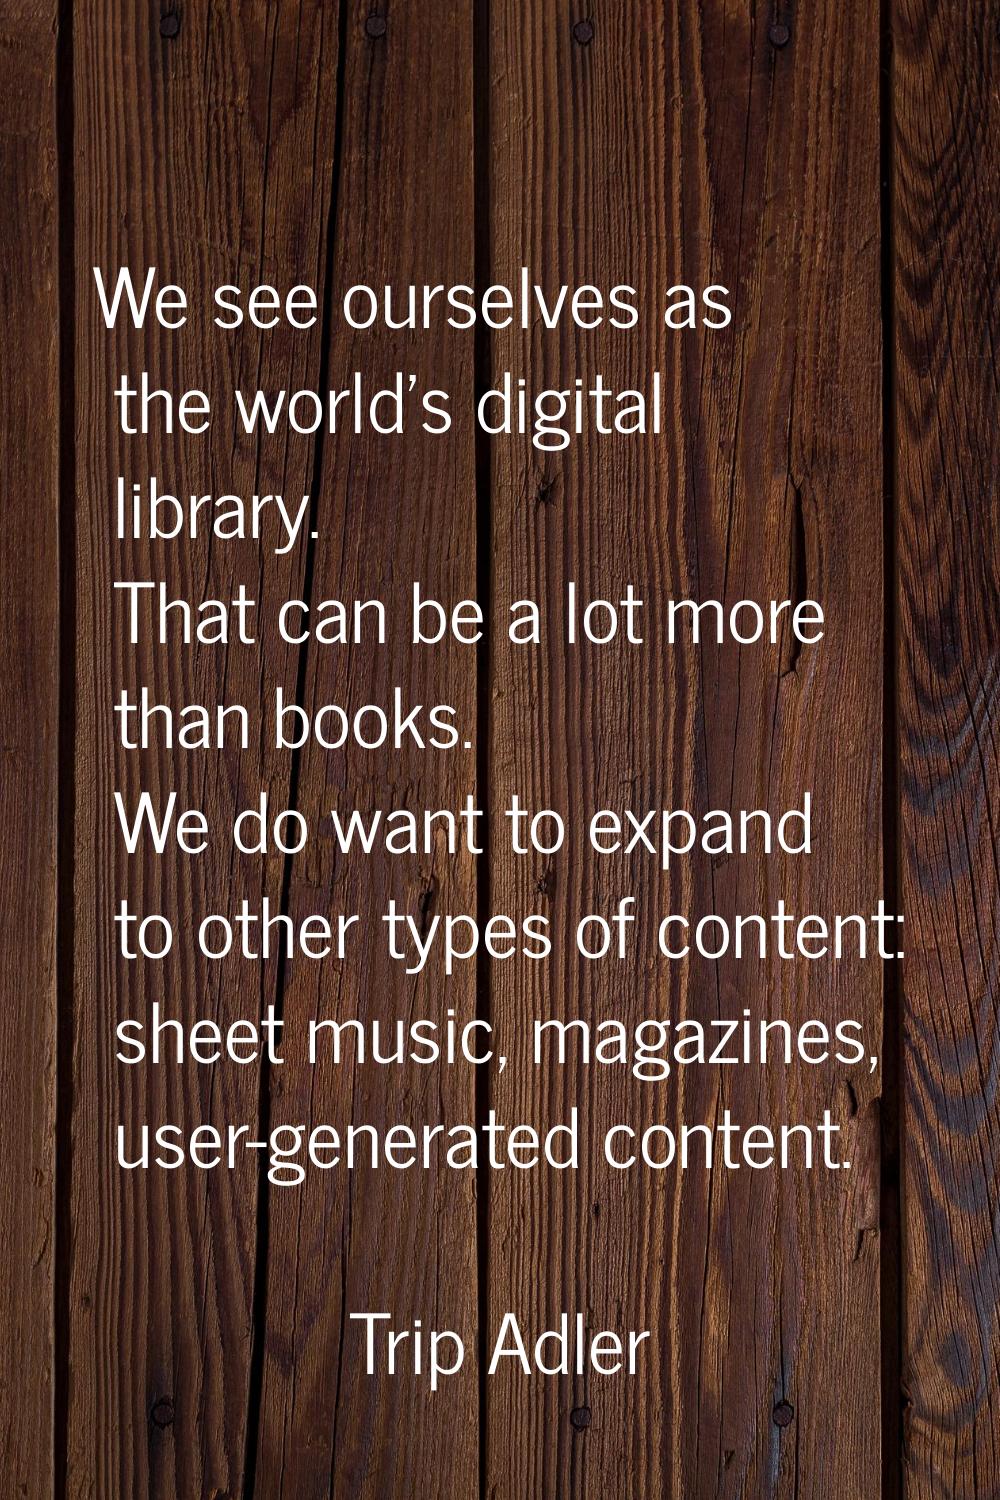 We see ourselves as the world's digital library. That can be a lot more than books. We do want to e